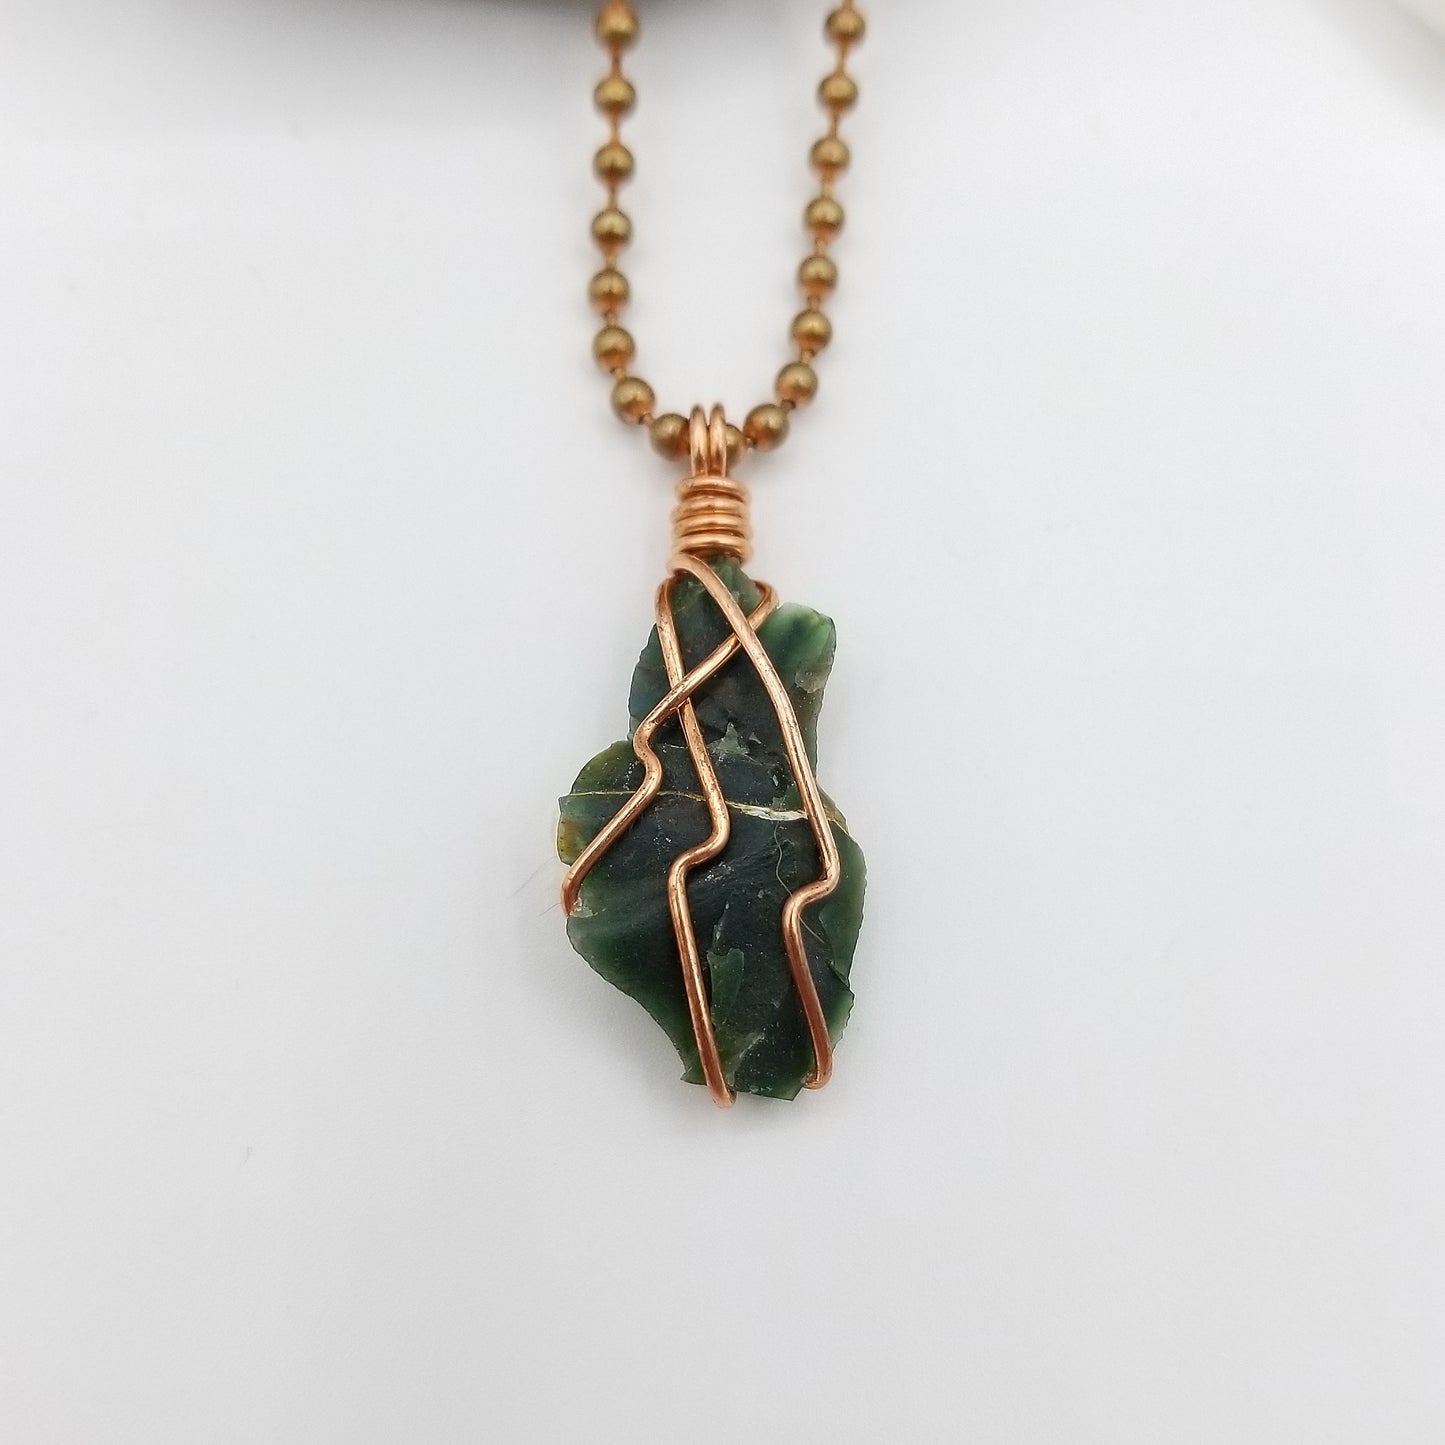 Raw Bloodstone Crystal Necklace in Copper Wire